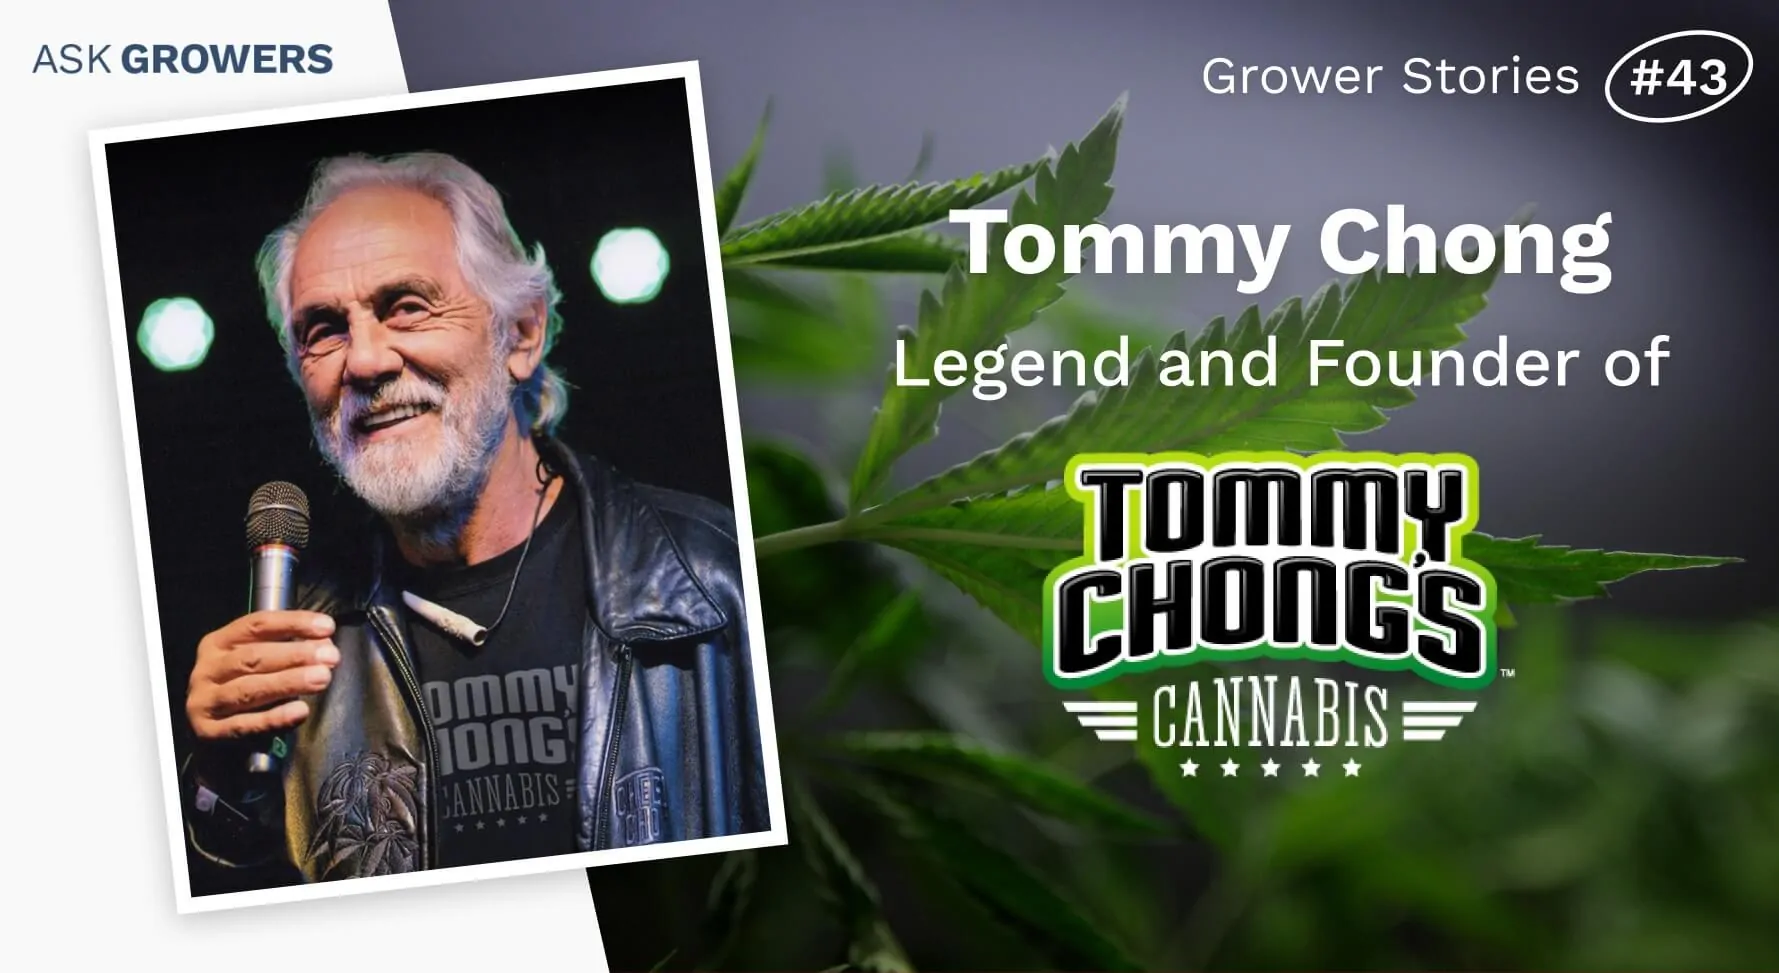 Grower Stories #43: Tommy Chong